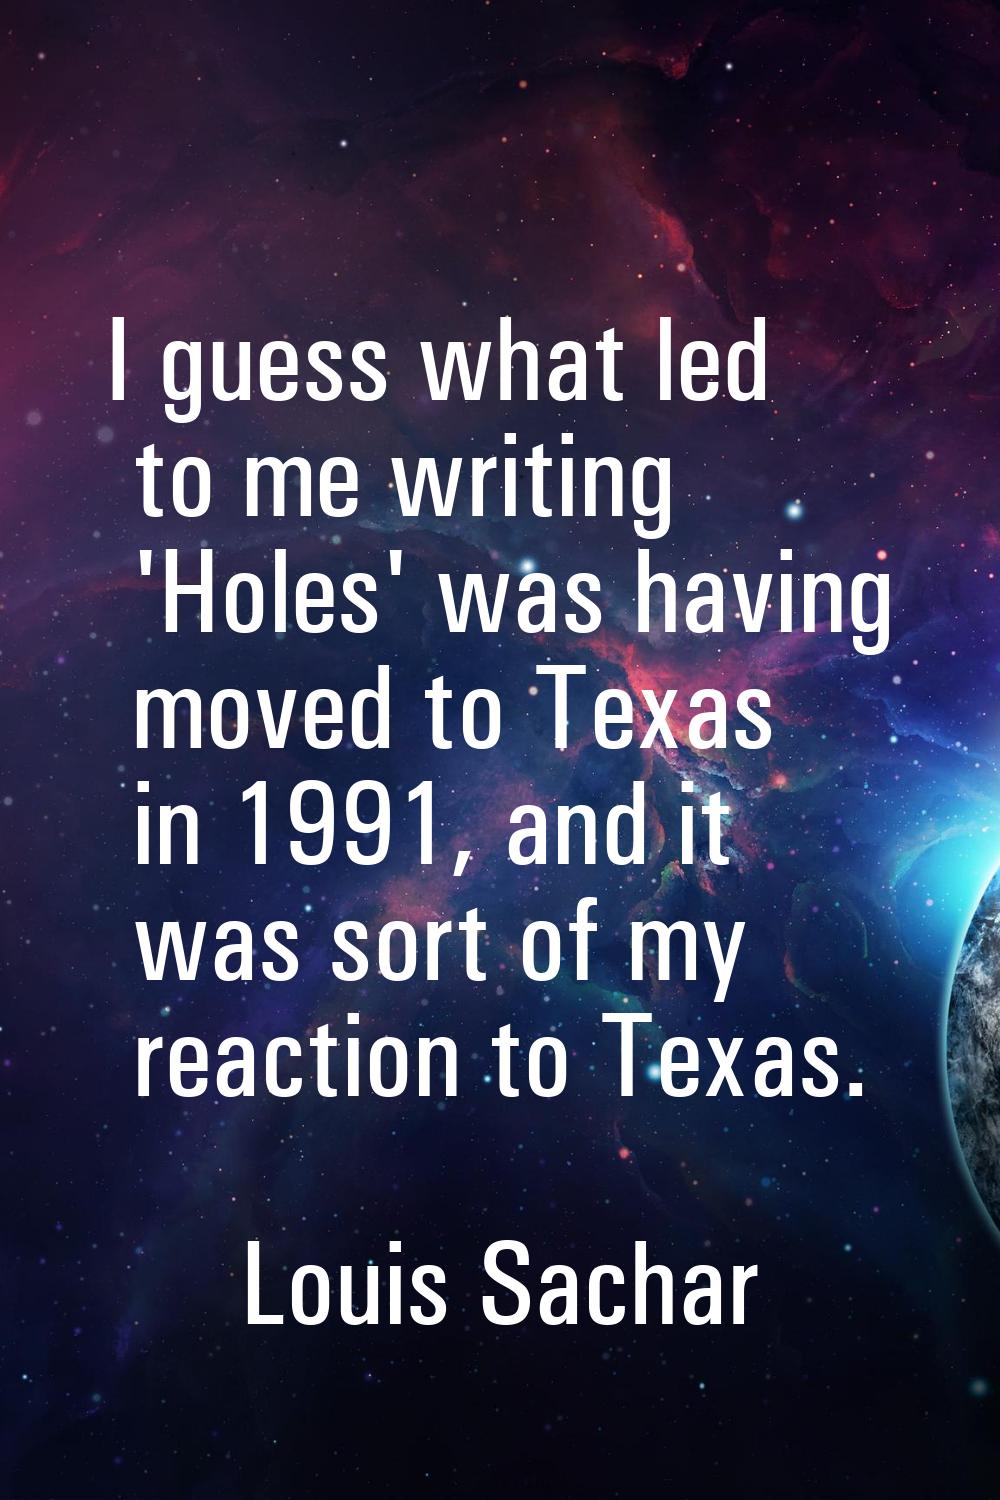 I guess what led to me writing 'Holes' was having moved to Texas in 1991, and it was sort of my rea